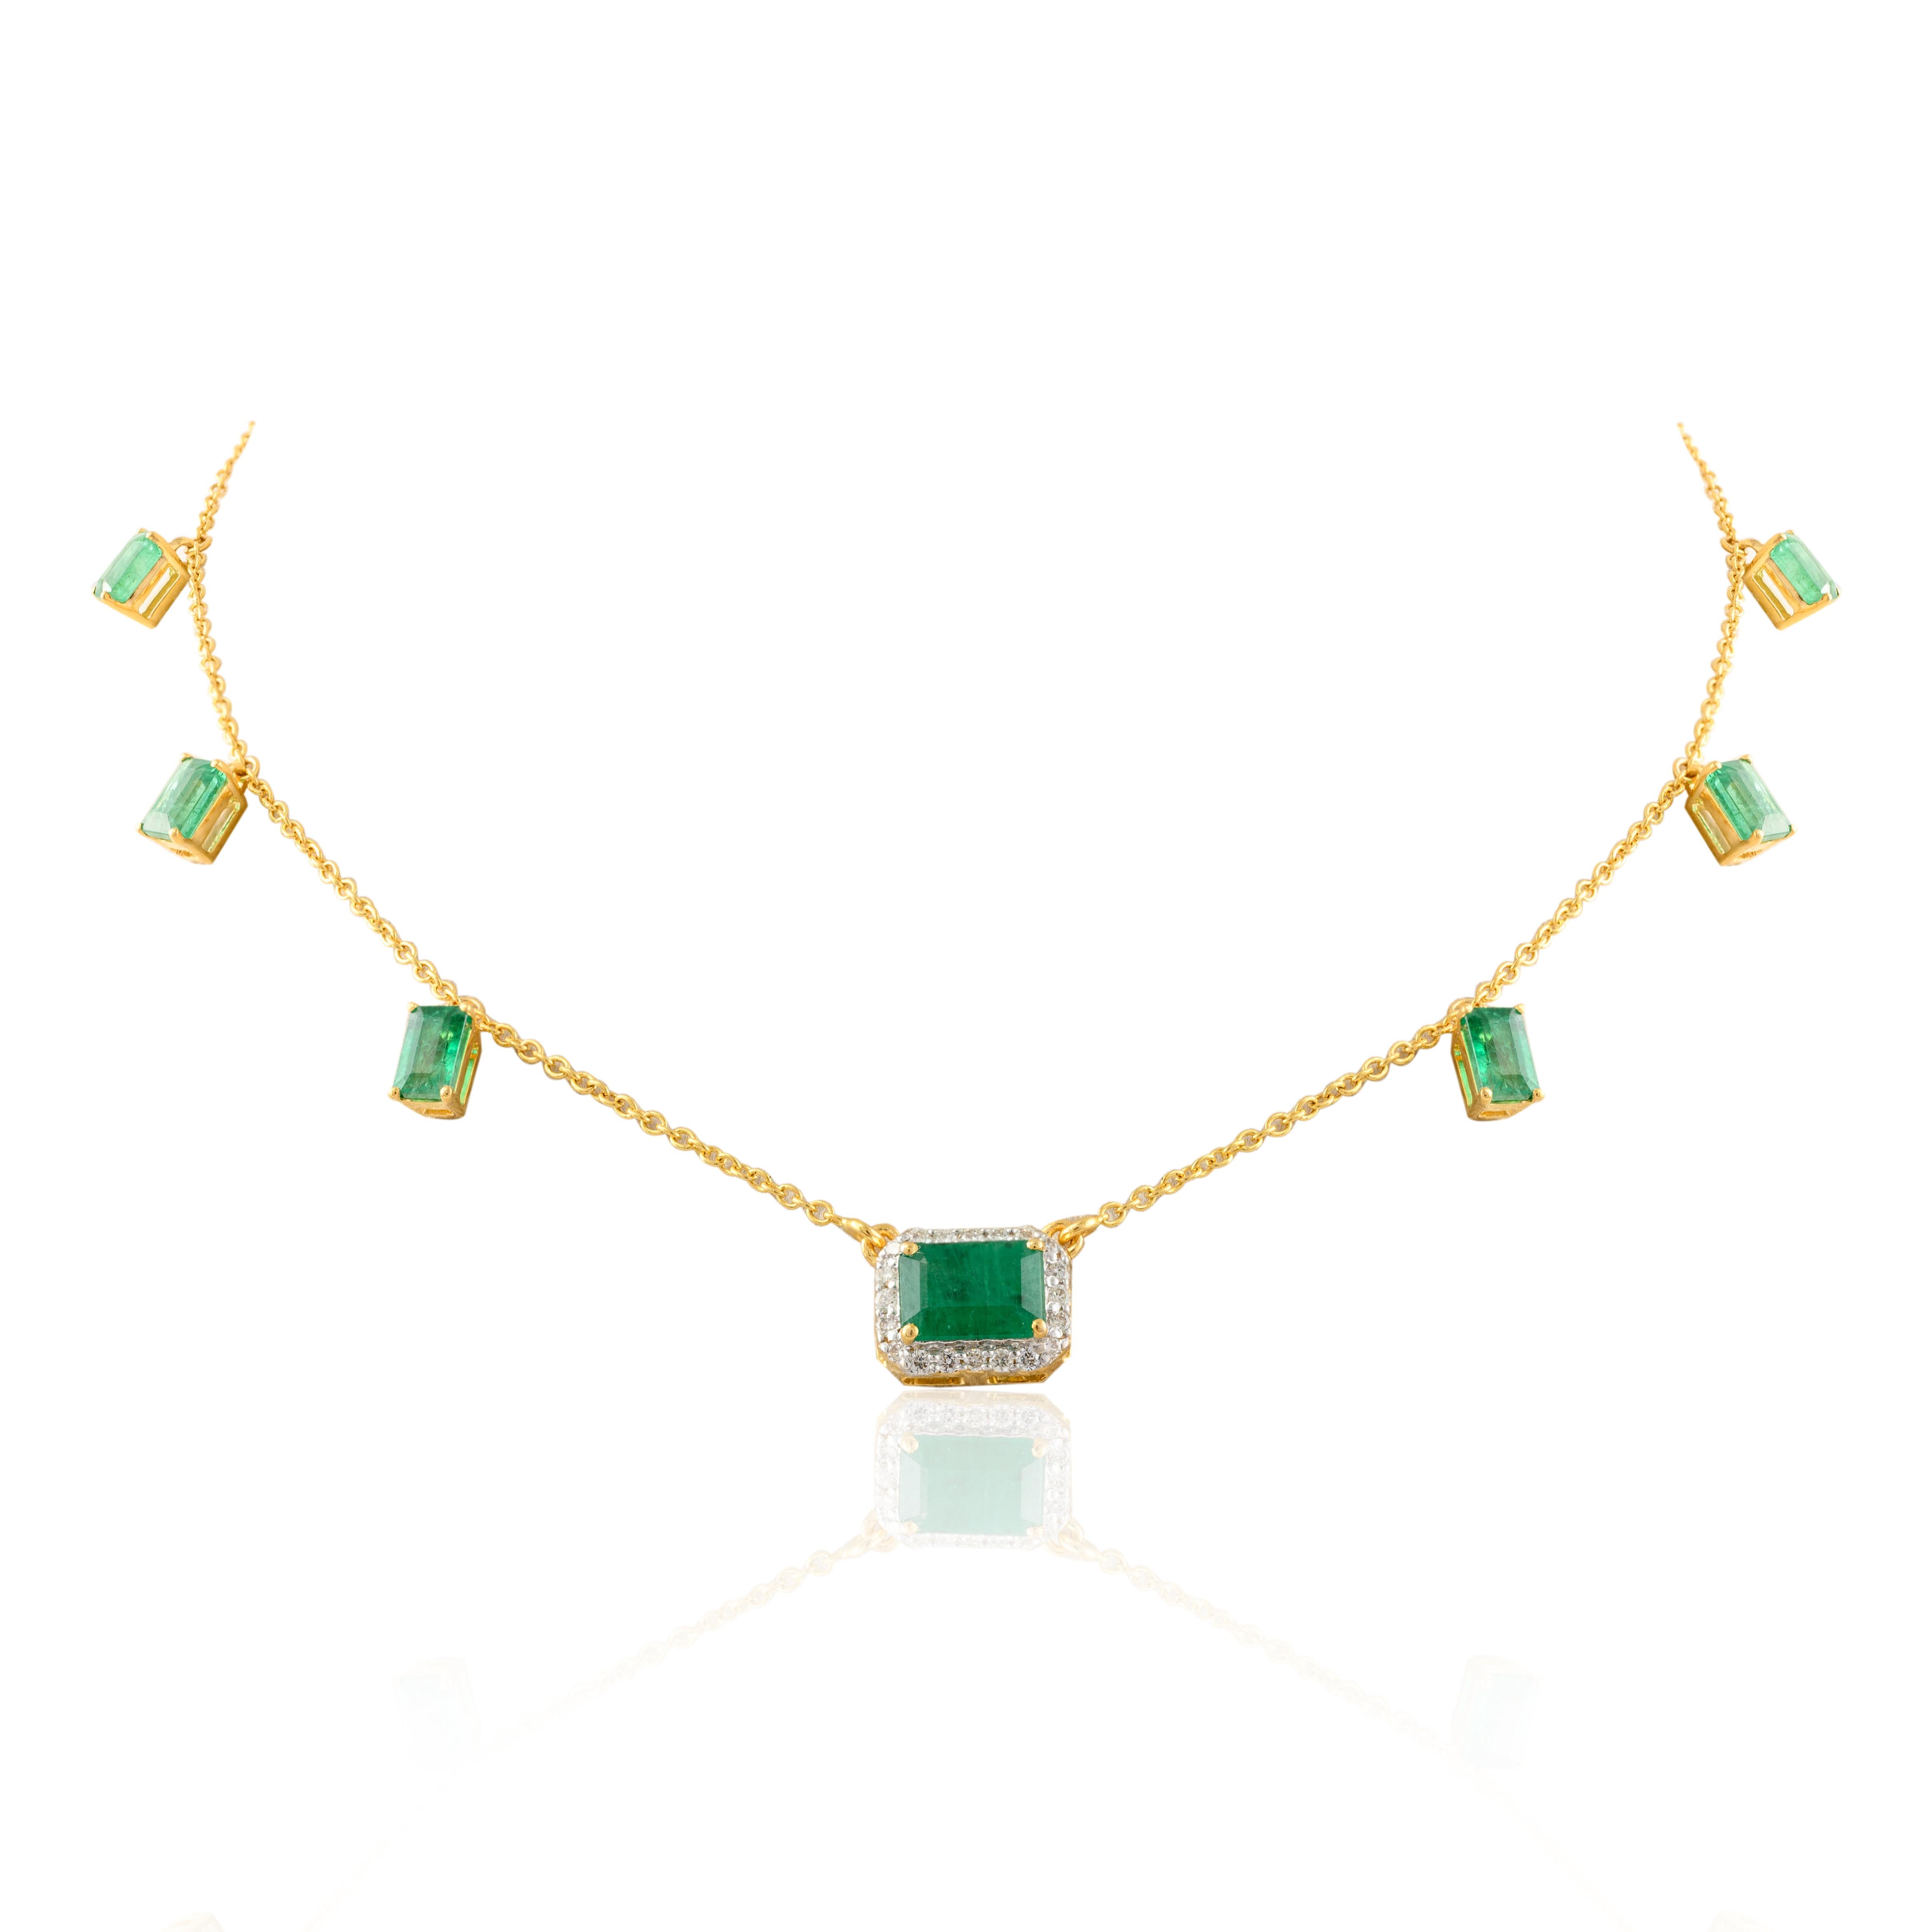 Emerald Charm Necklace 14k Yellow Gold, Emerald Fine Jewelry Gift For Women For Sale 2